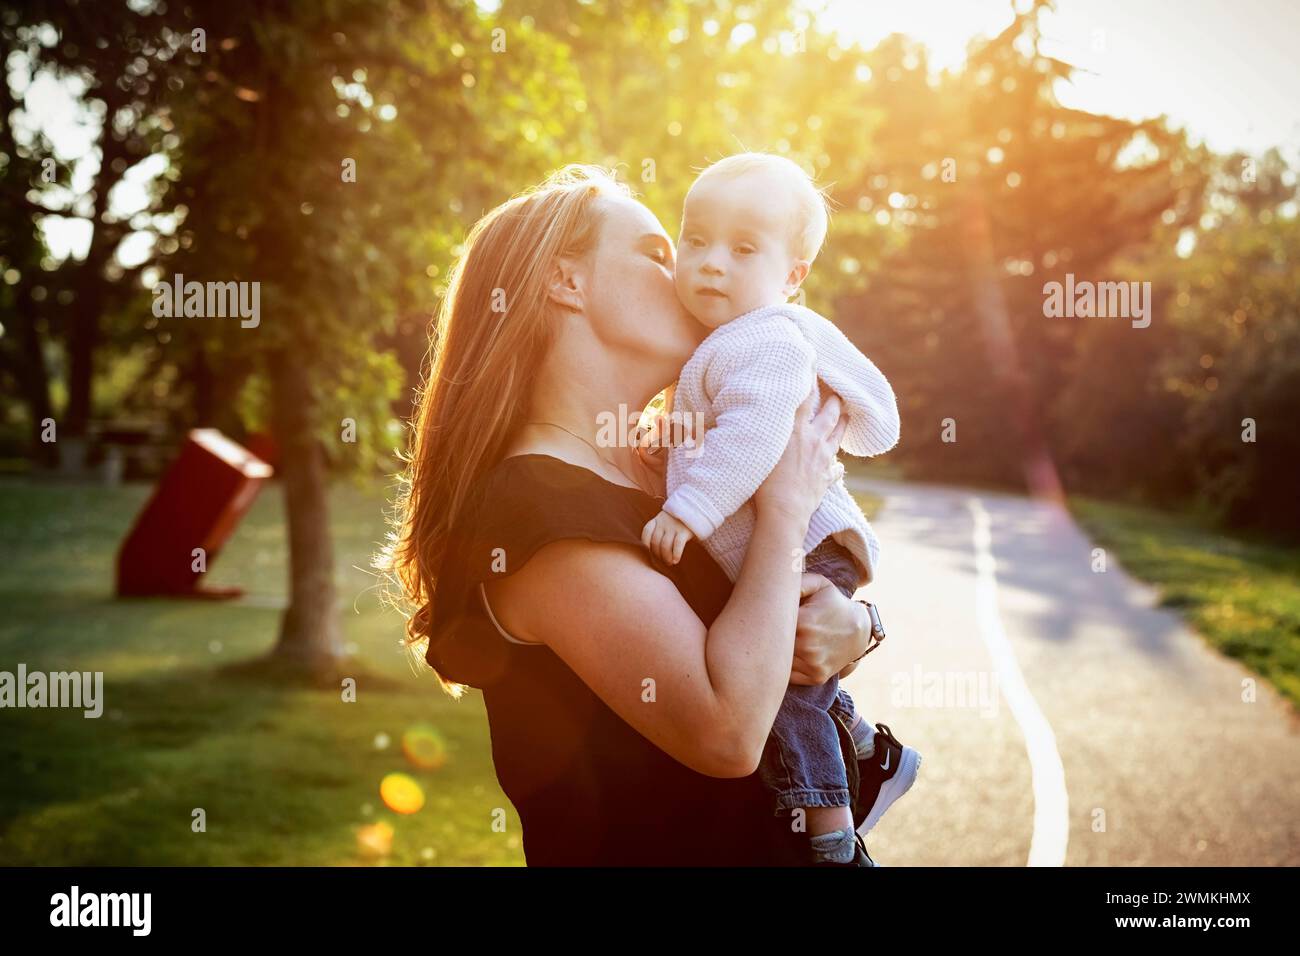 Mother spending quality time with her son who has Down Syndrome in a city park during an bright sunny autumn day; Leduc, Alberta, Canada Stock Photo